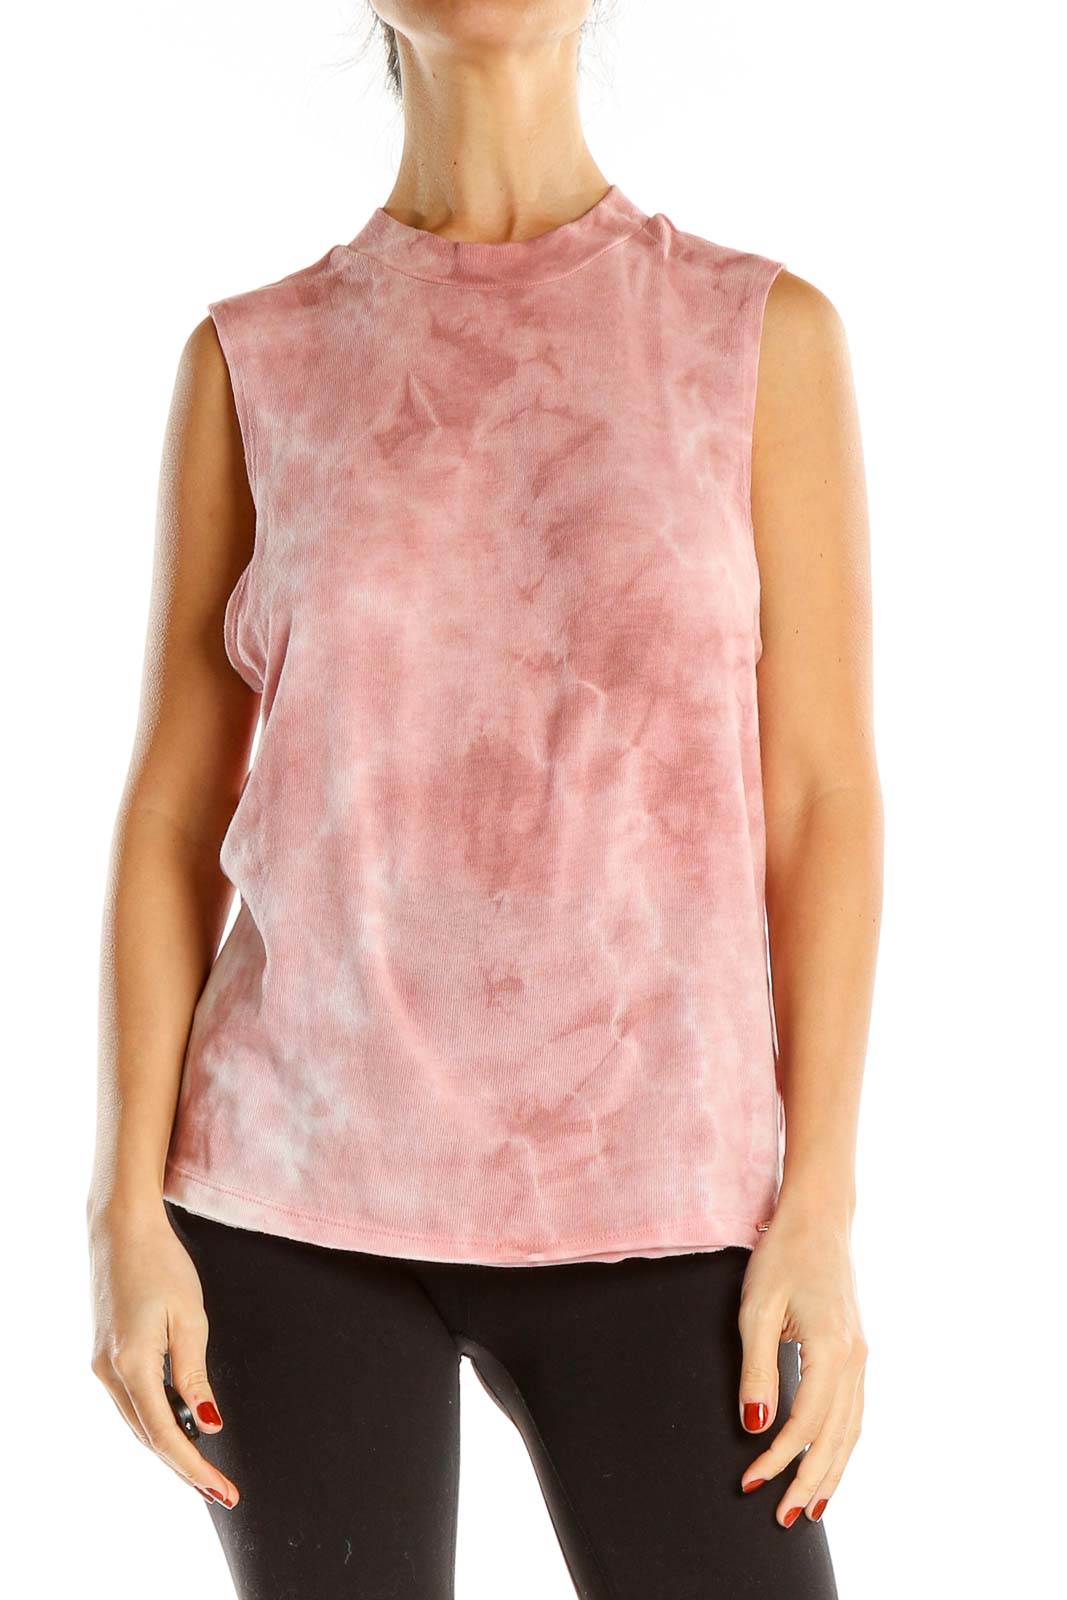 Pink Tie And Dye Casual Tank Top Front